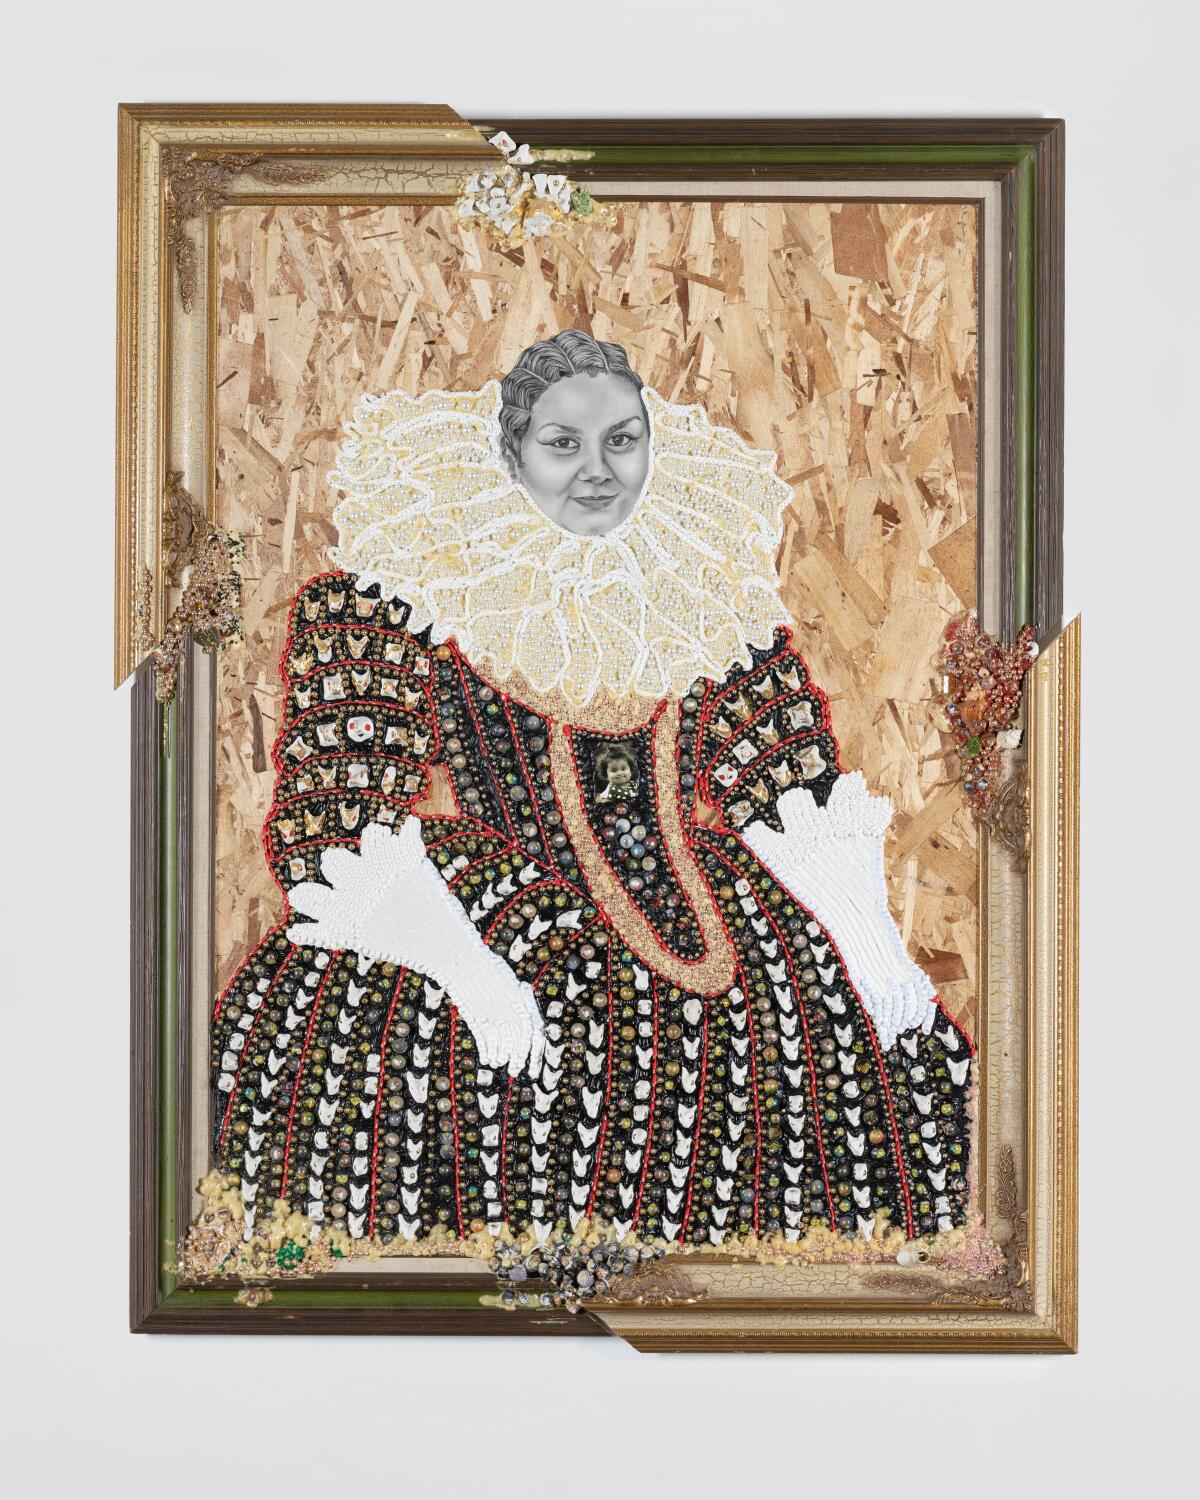 A framed work in mixed media shows a smiling woman in Elizabethan era garb including a ruff and gloves.